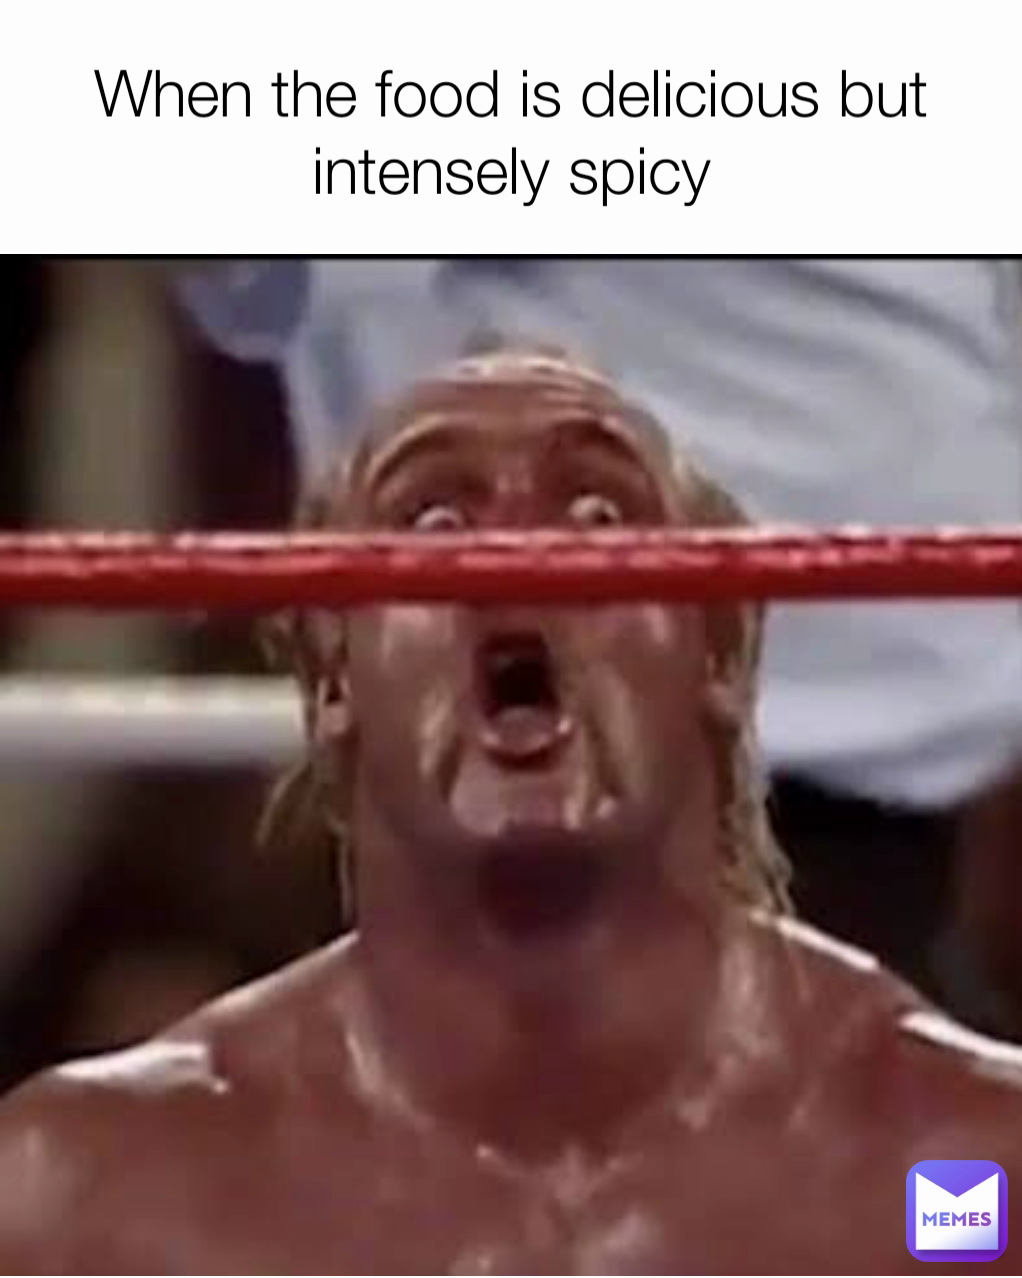 When the food is delicious but intensely spicy